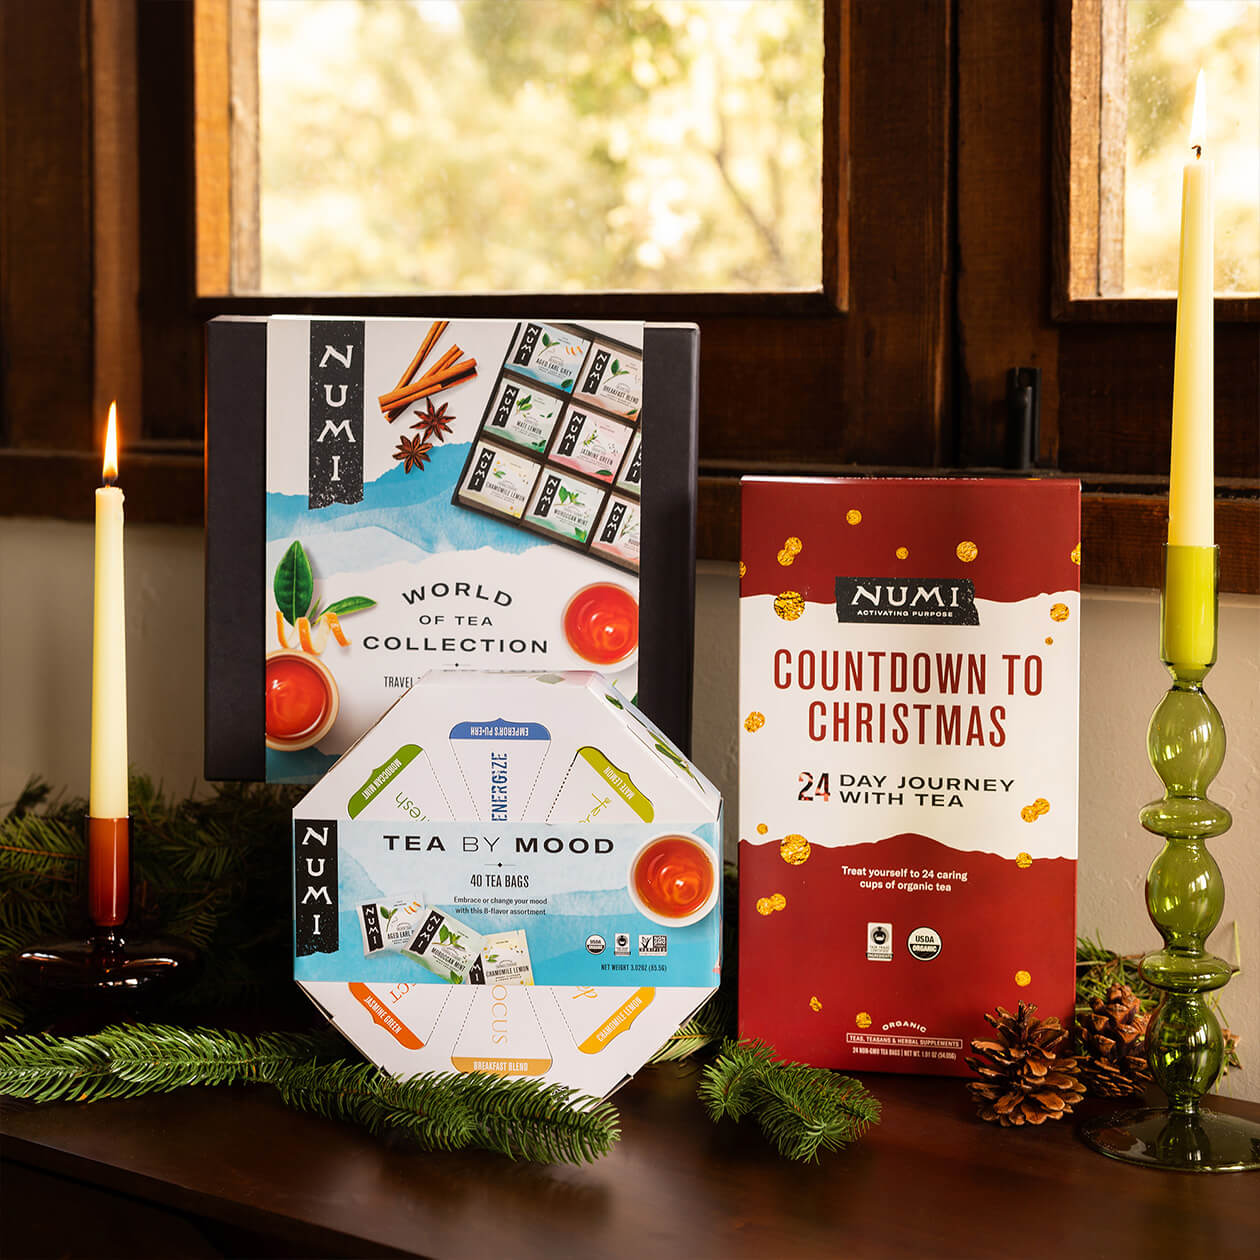 A collection of Numi Gifts, including Self-care Sampler, World of Tea and Advent Calendar in a holiday setting